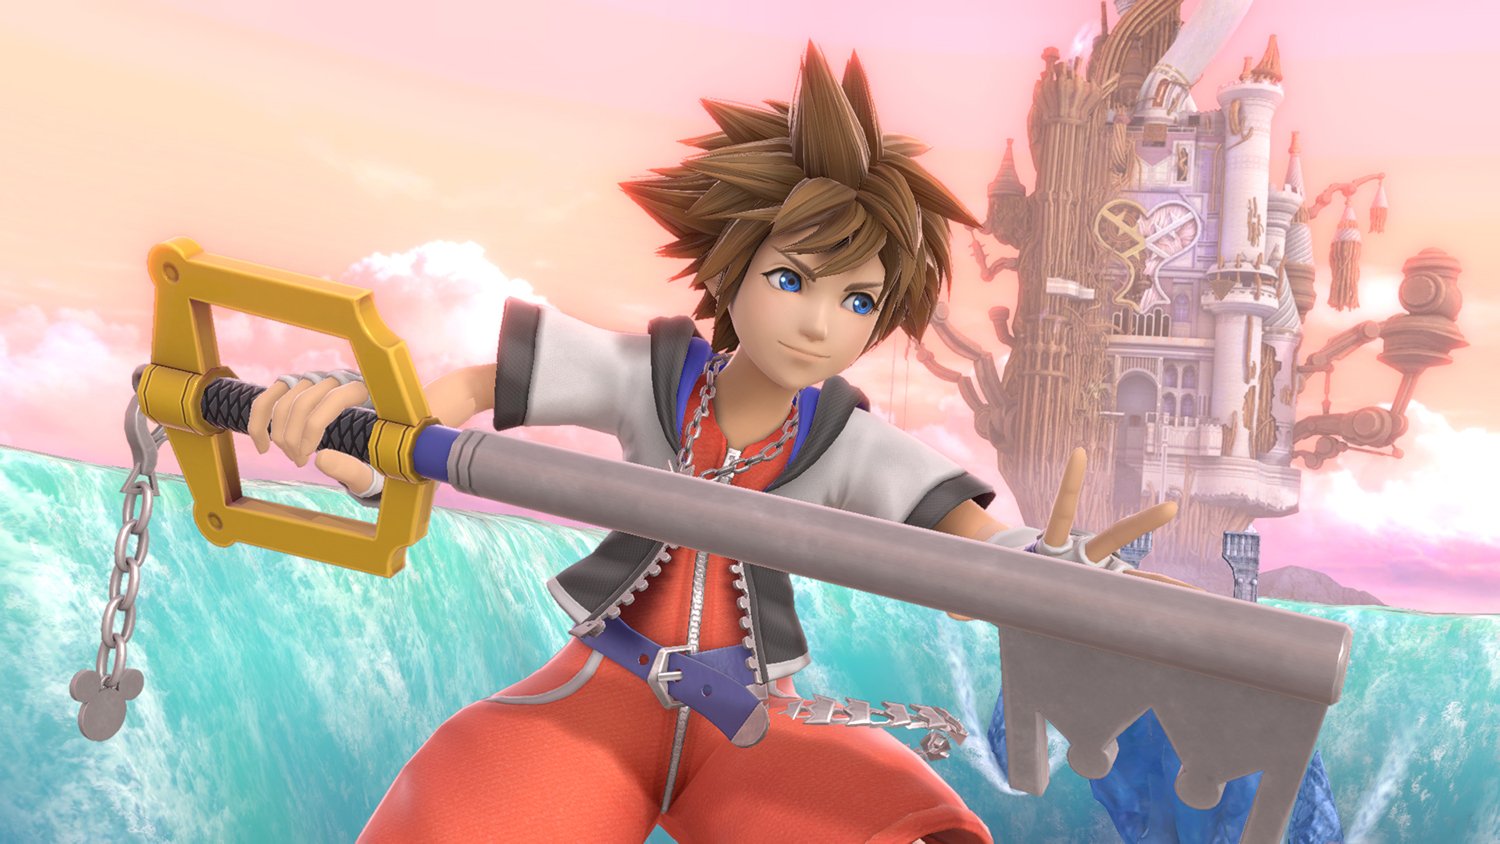 Sora from Kingdom Hearts holds a key in Super Smash Bros. Ultimate ahead of release date.